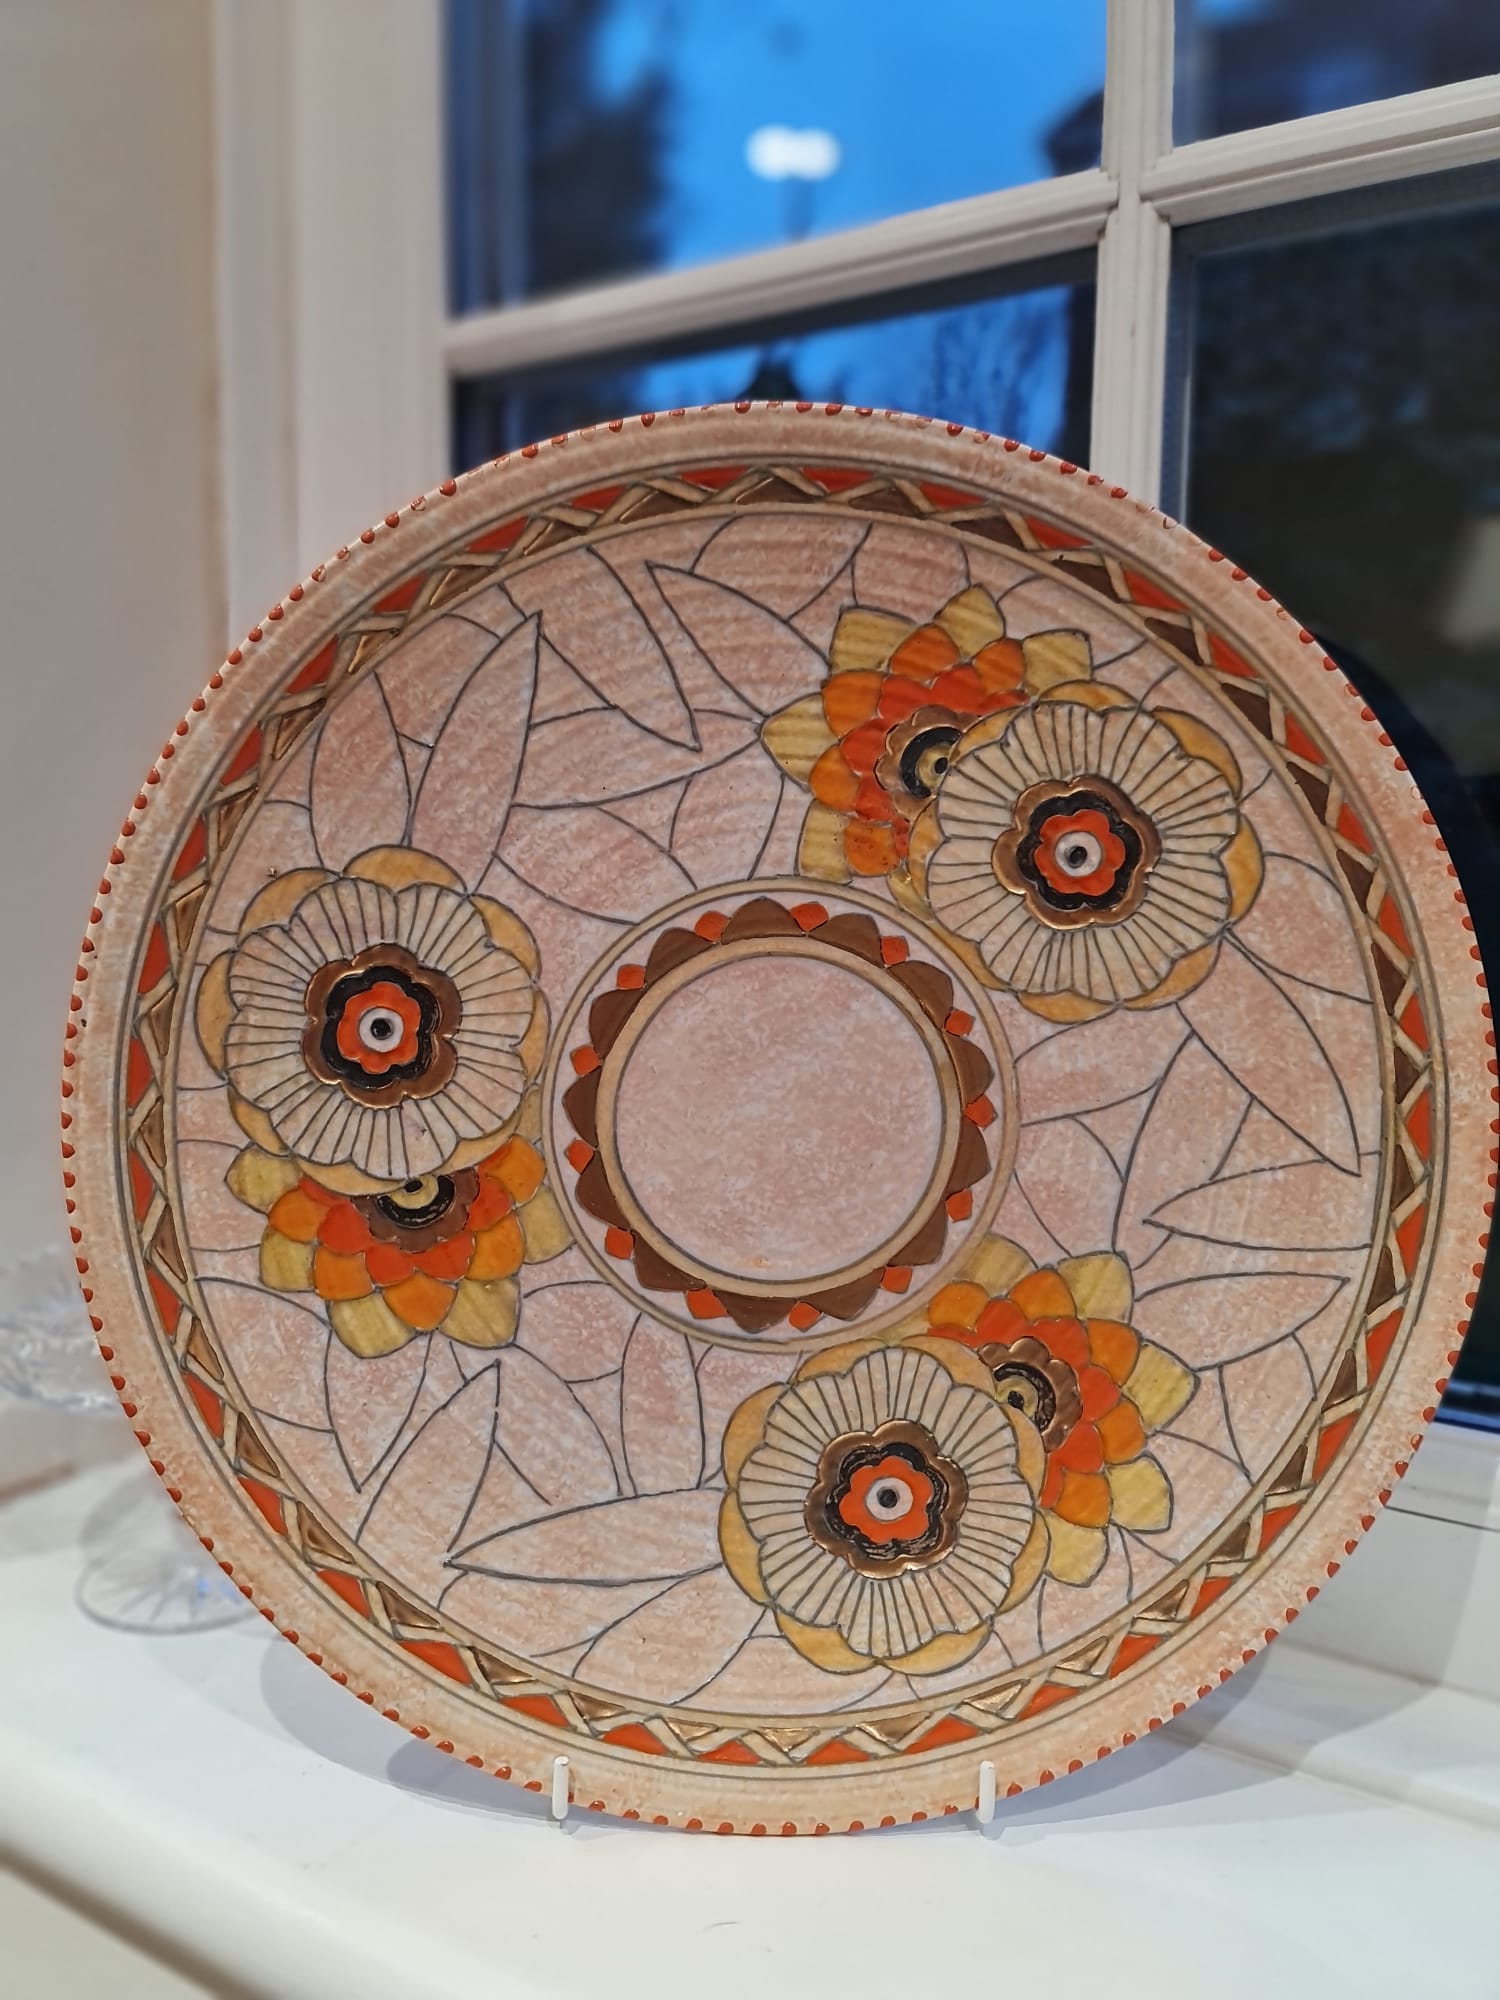 This collector plate, designed by Charlotte Rhead, features an intricate pattern of leaves and showcases the Art Deco style.